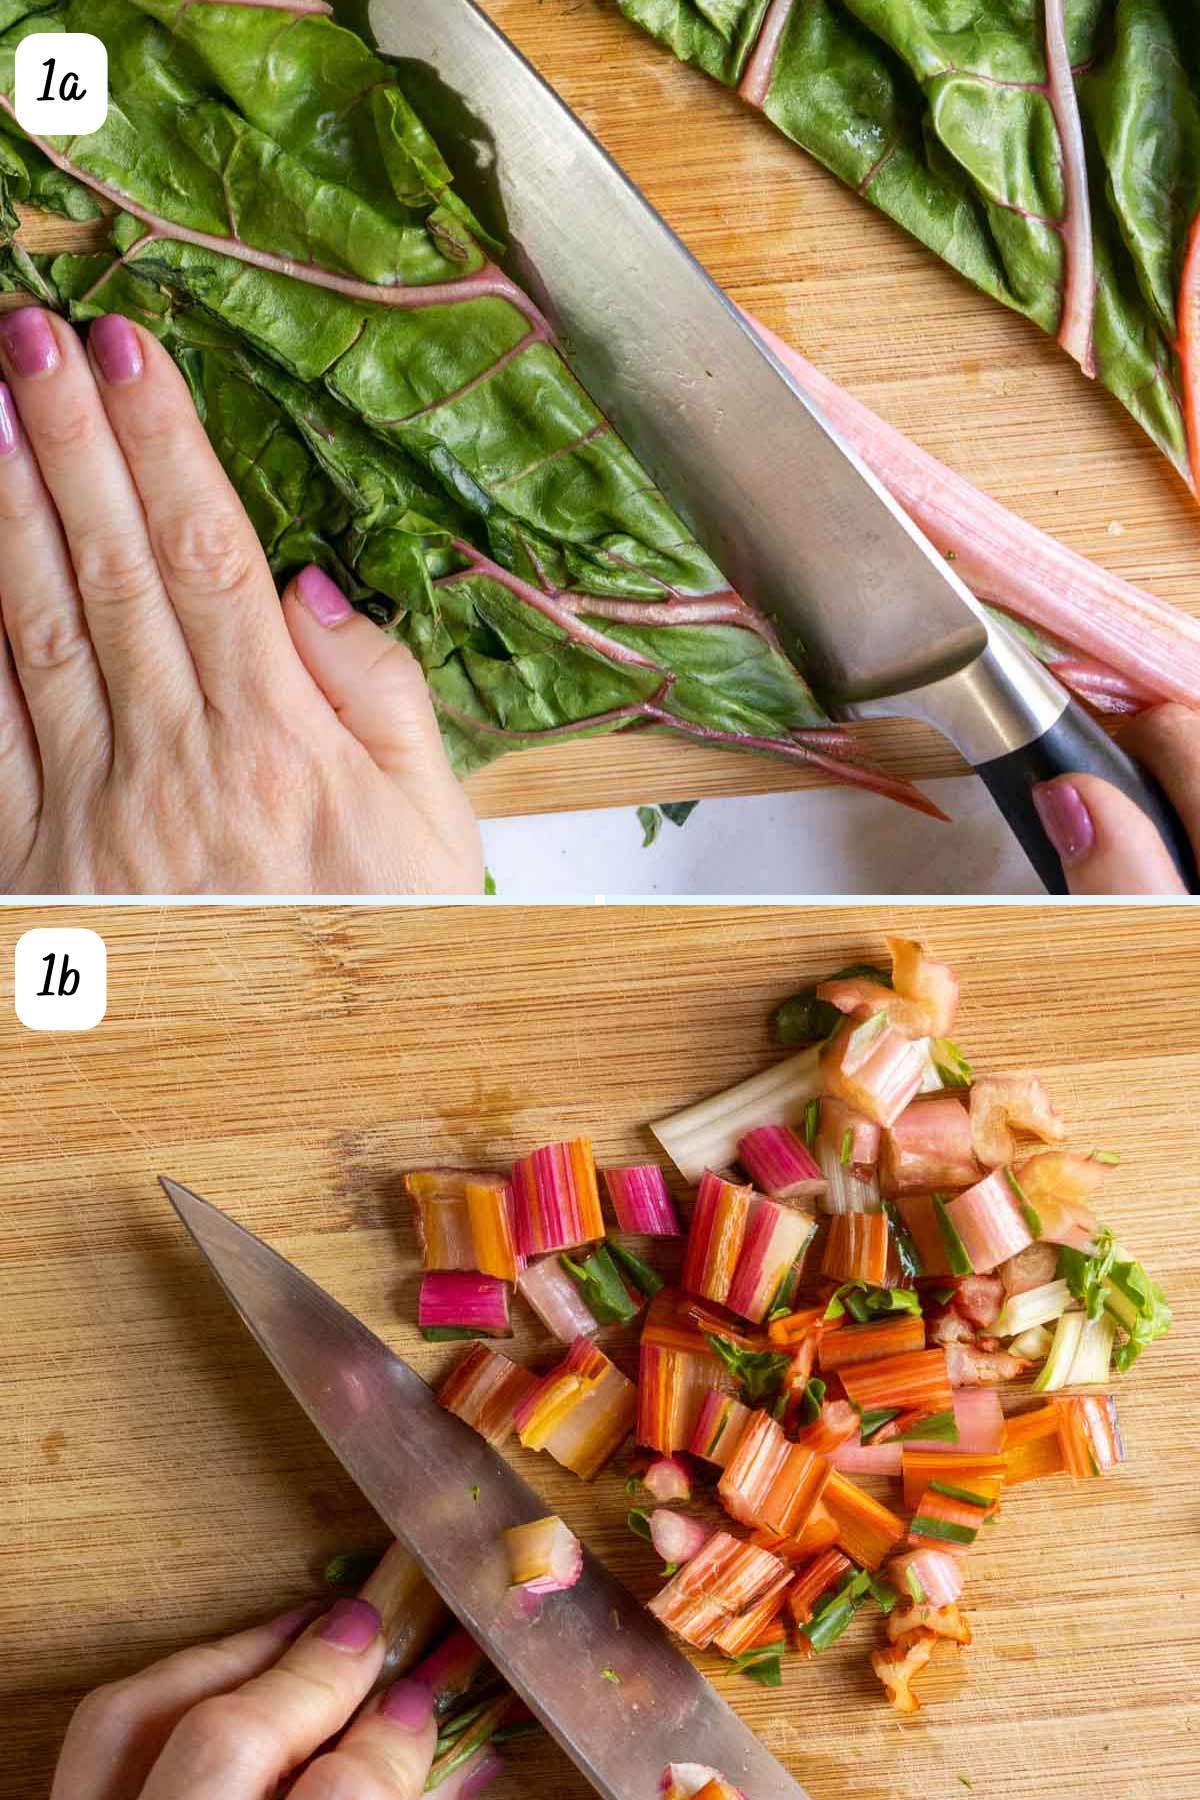 Person demonstrating how to remove stems and cut swiss chard.